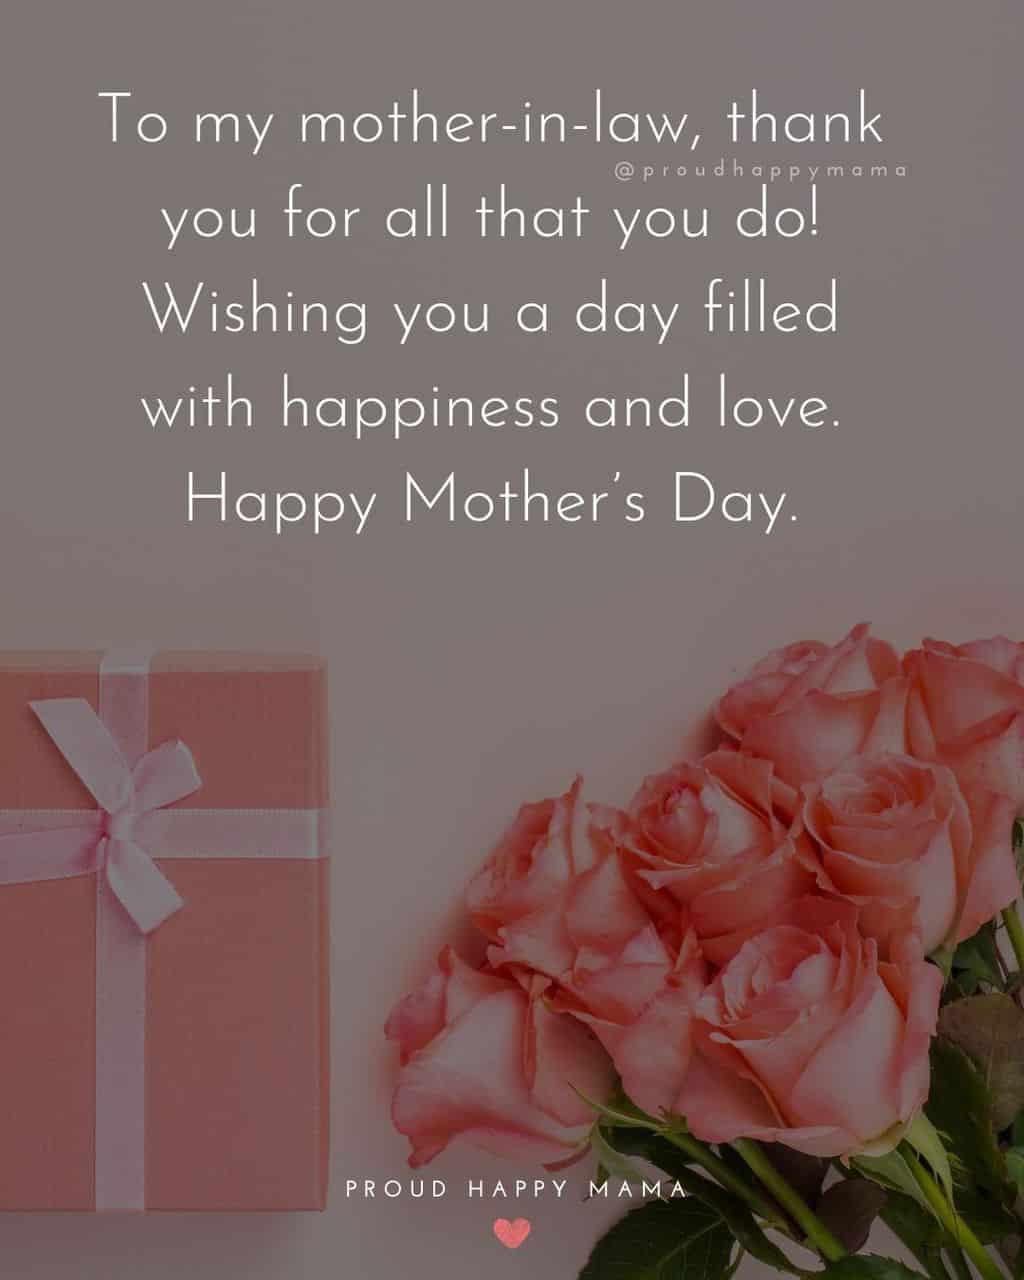 Happy Mothers Day Quotes For Mother In Law - To my mother in law, thank you for all that you do! Wishing you a day filled with happiness